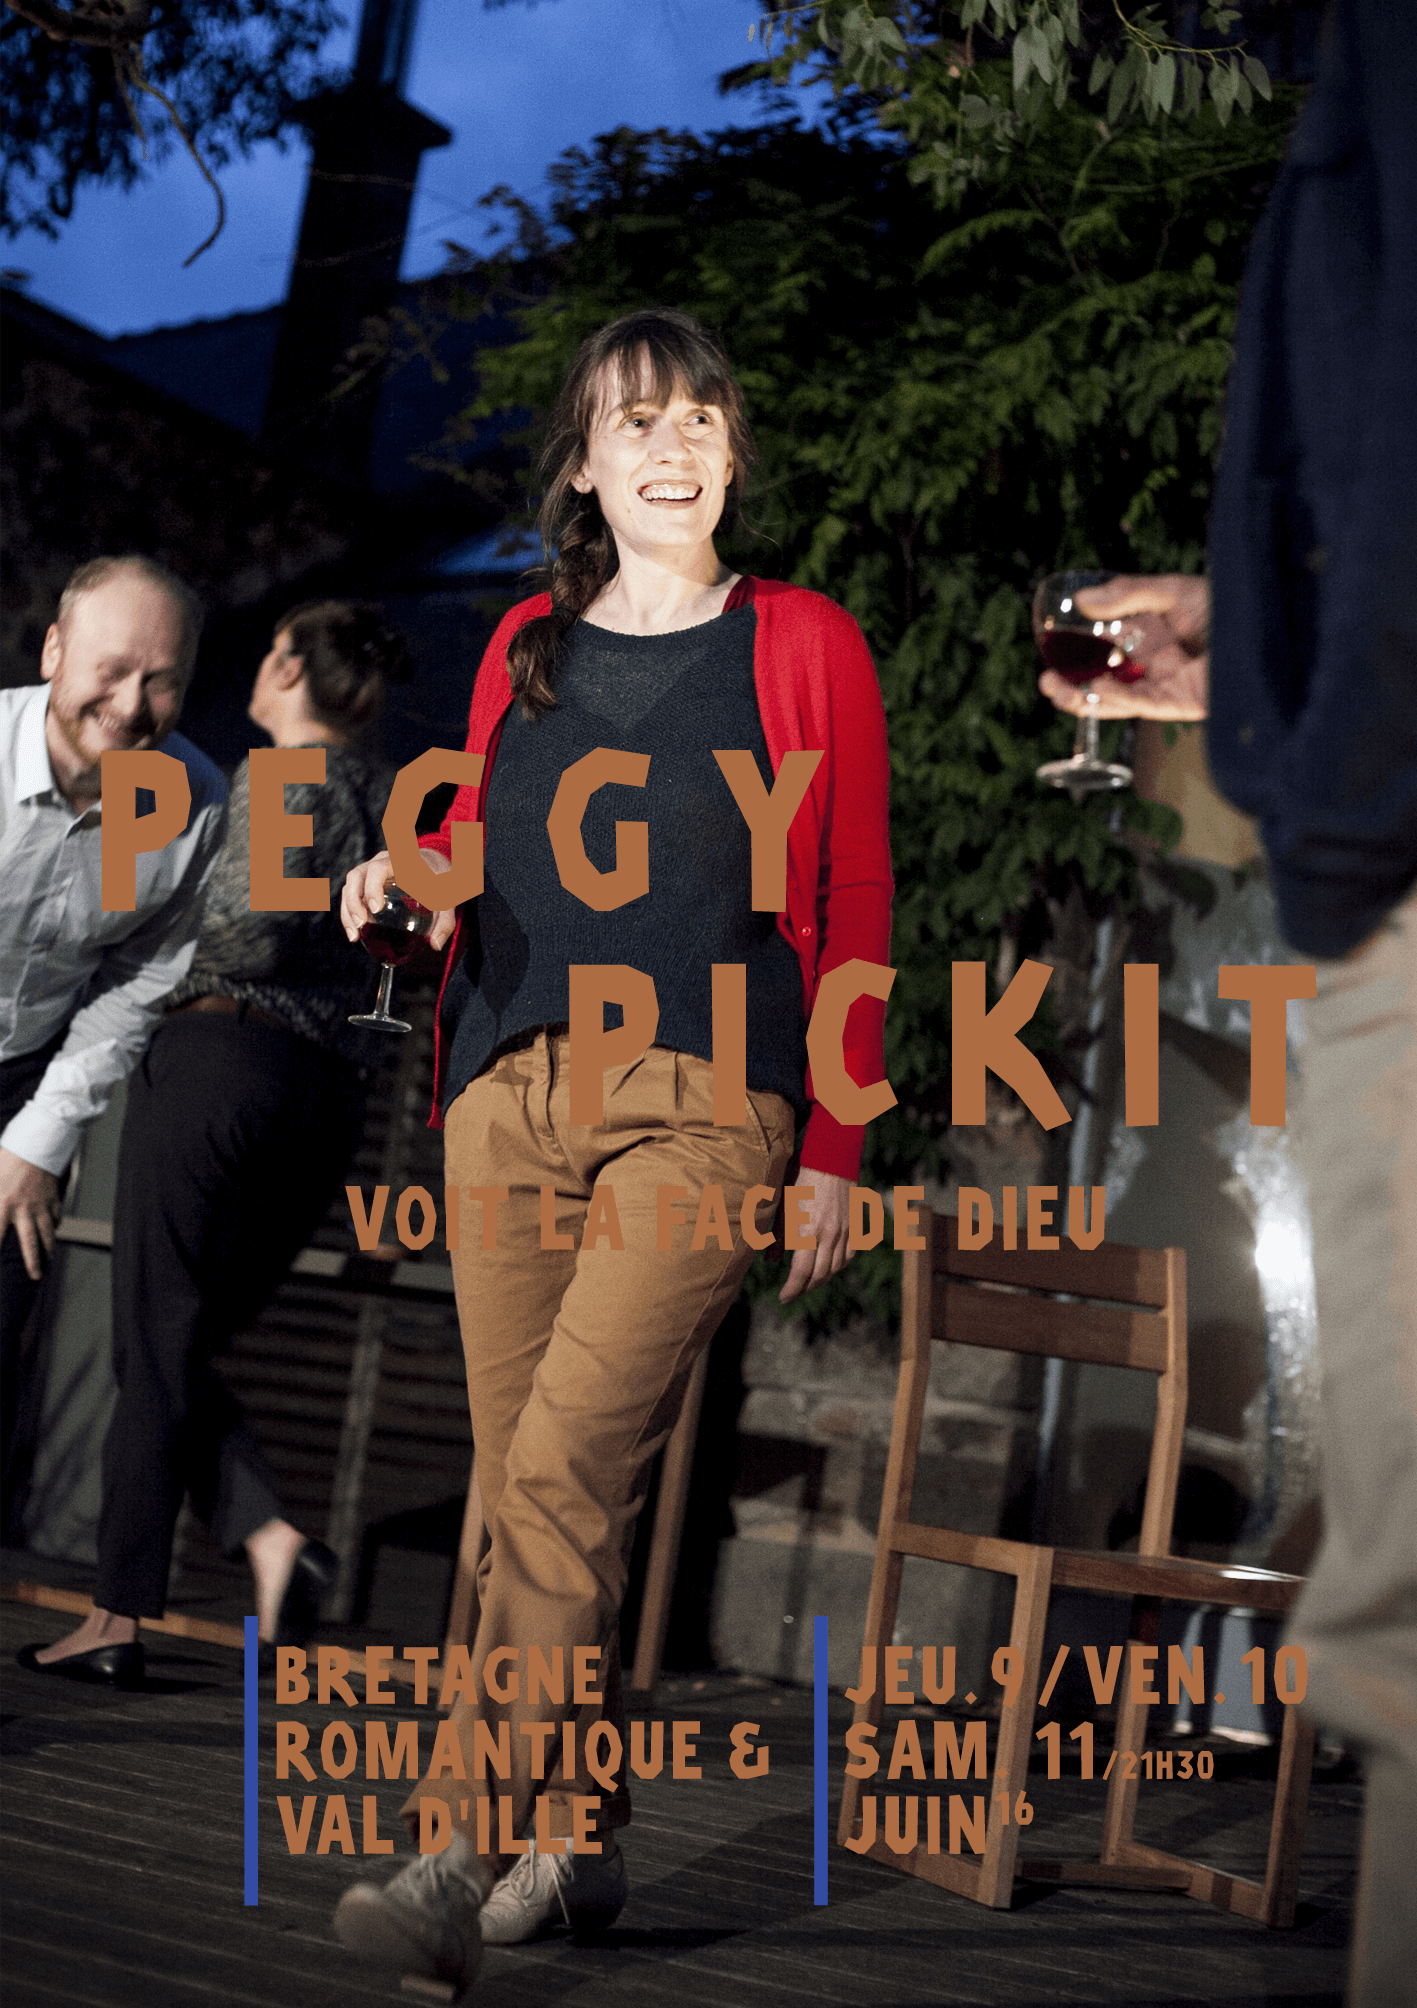 PEGGY PICKIT